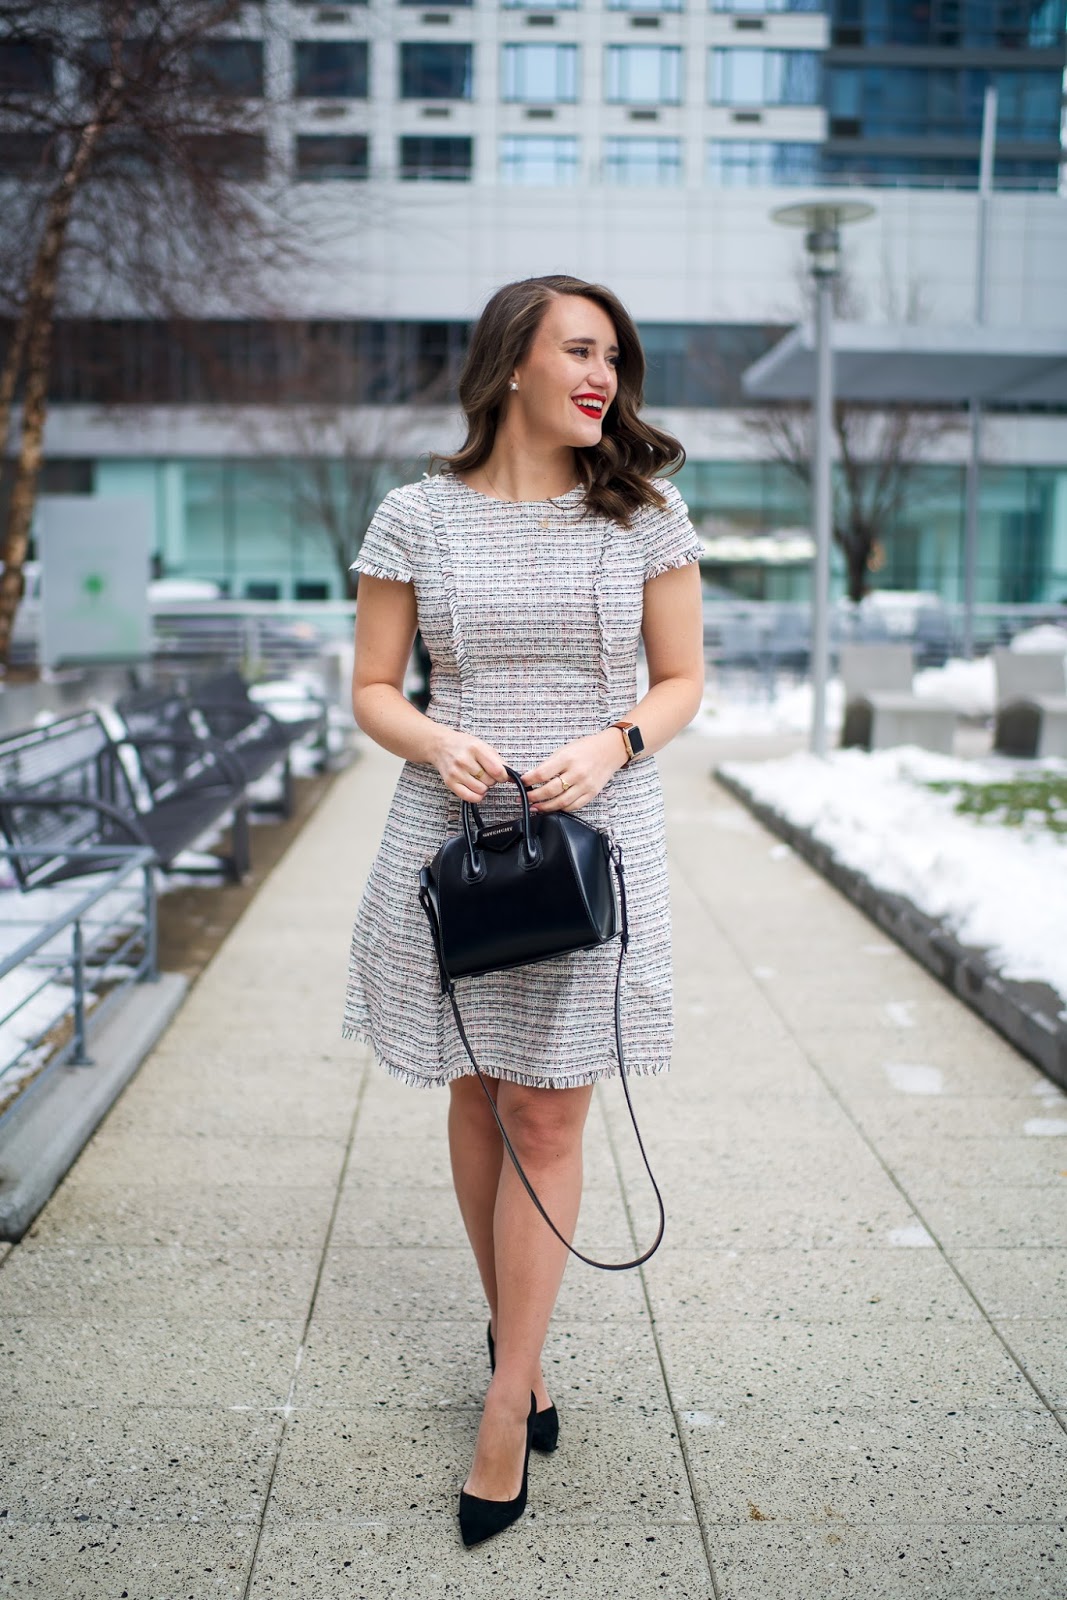 What to wear to work: A tweed dress - Thatcorporatechic